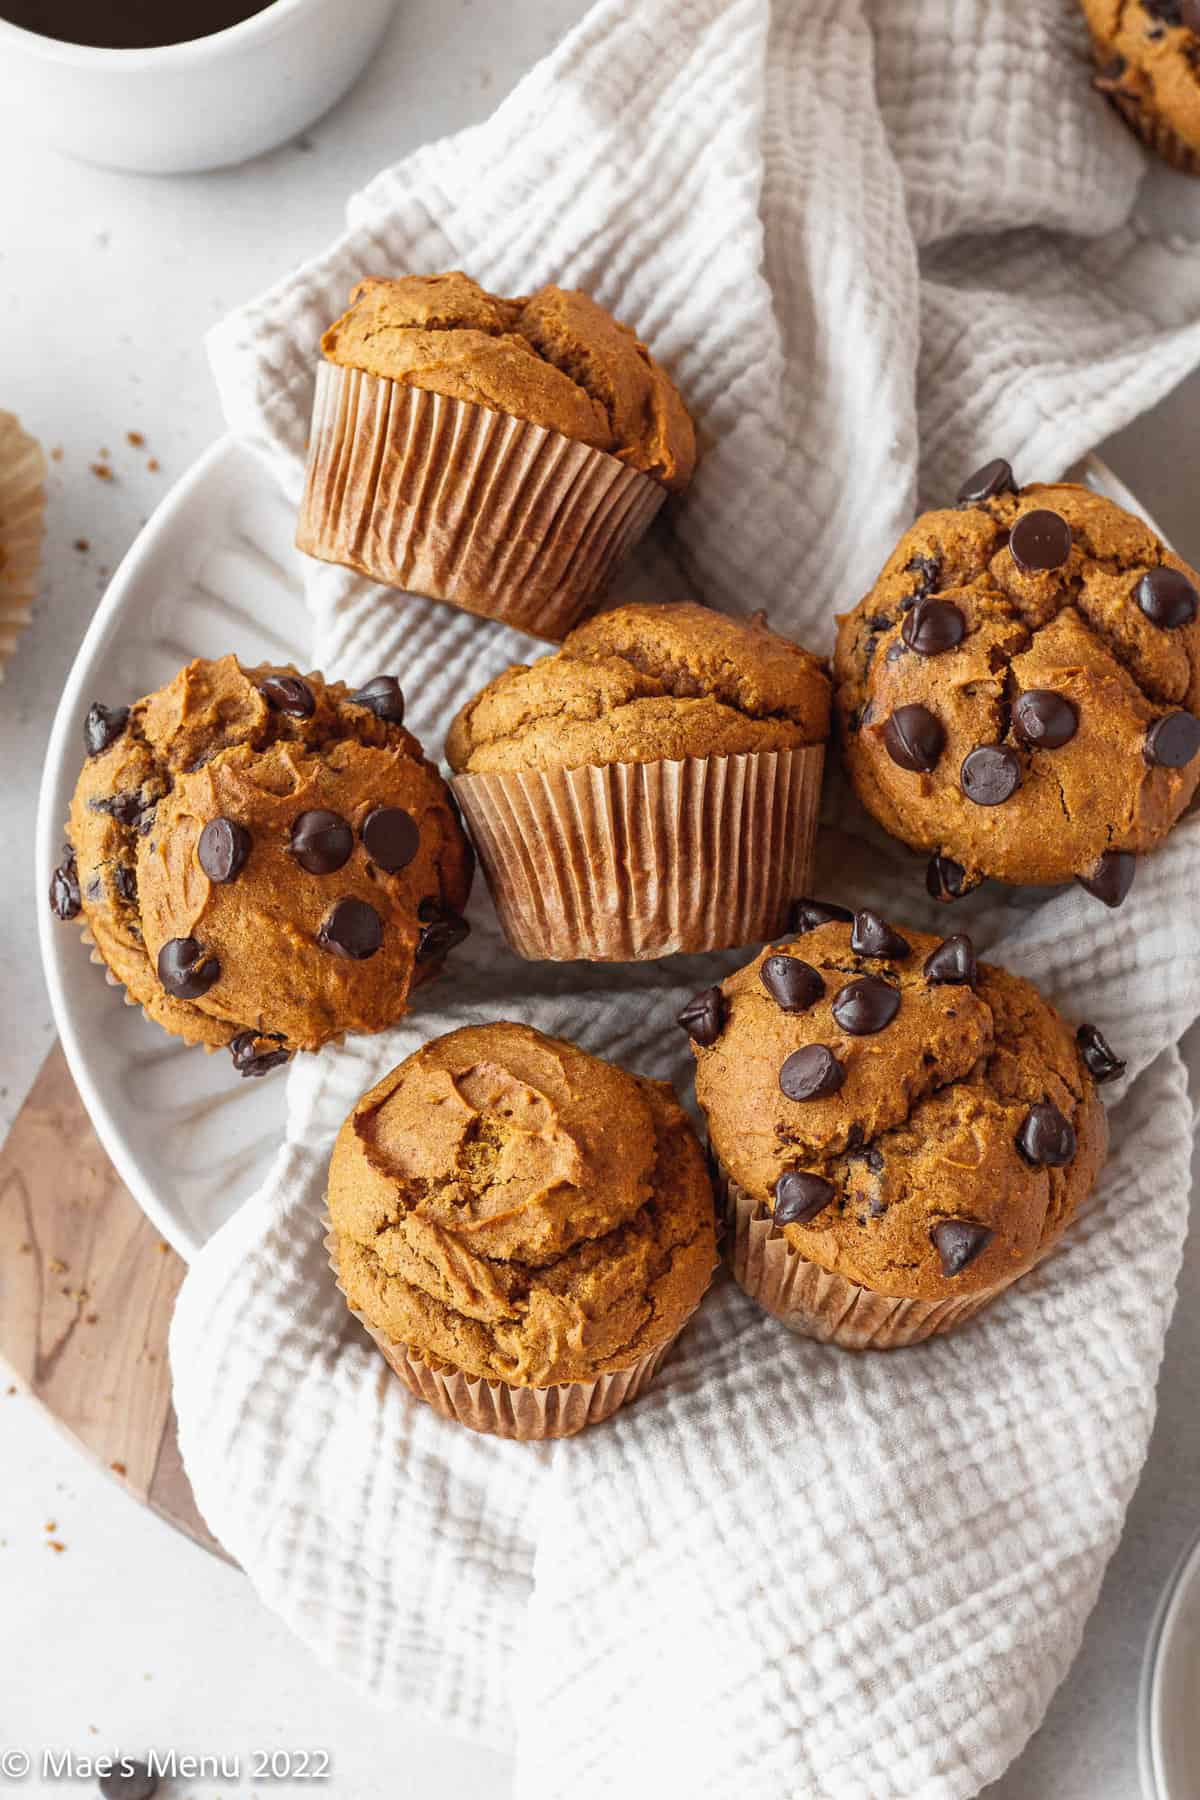 Gluten-free pumpkin muffins laying on a towel in a white bowl.